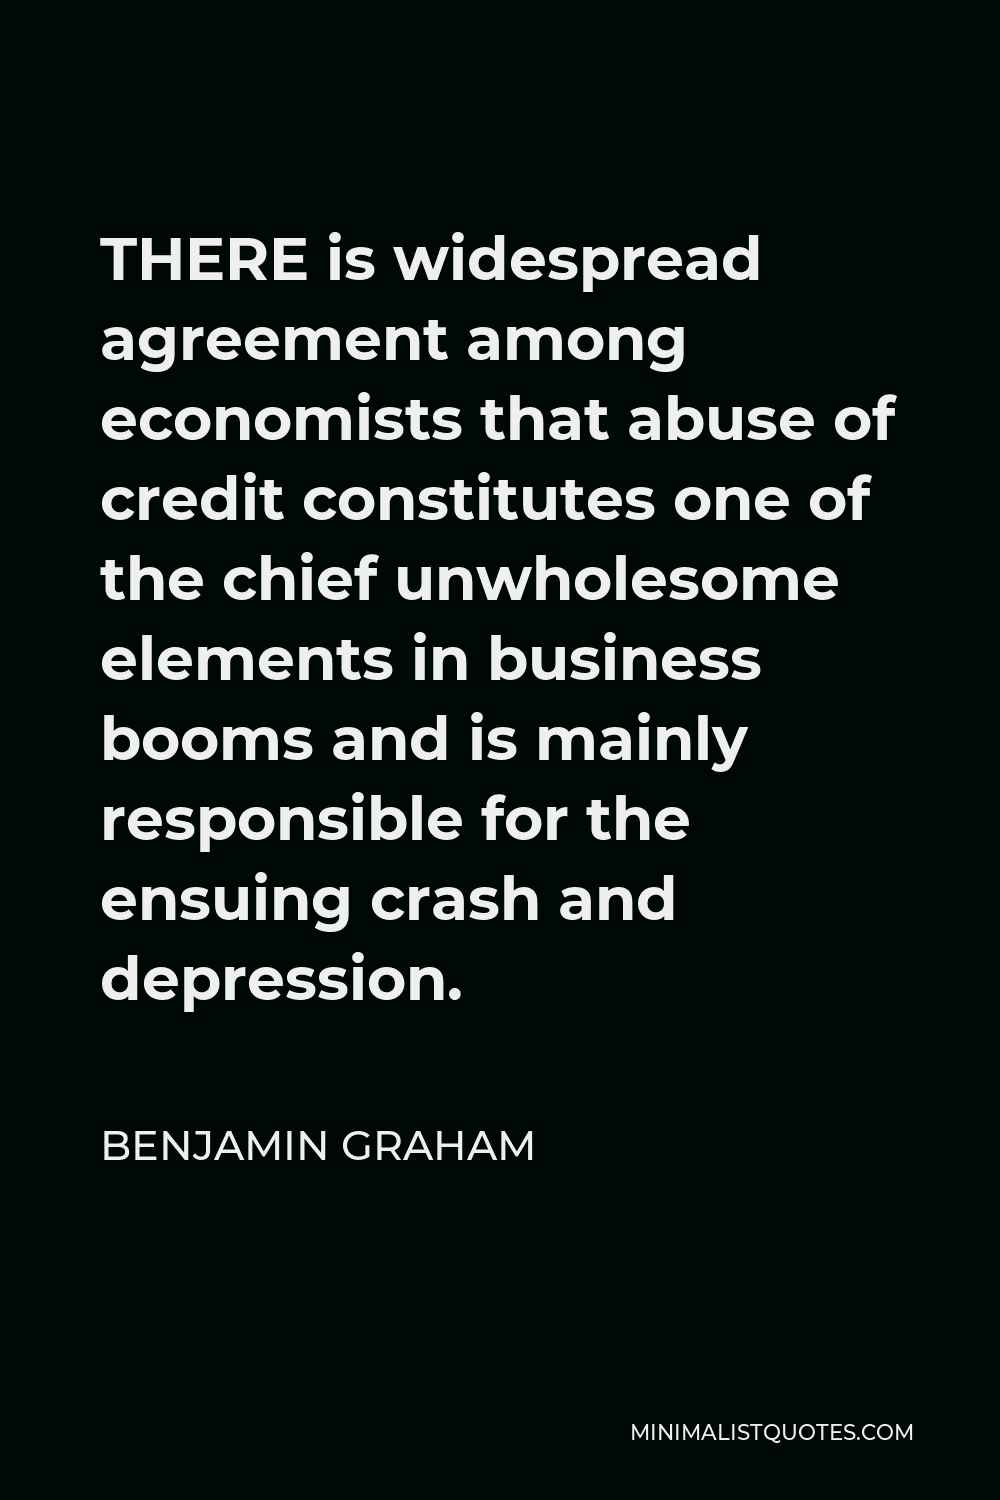 Benjamin Graham Quote - THERE is widespread agreement among economists that abuse of credit constitutes one of the chief unwholesome elements in business booms and is mainly responsible for the ensuing crash and depression.